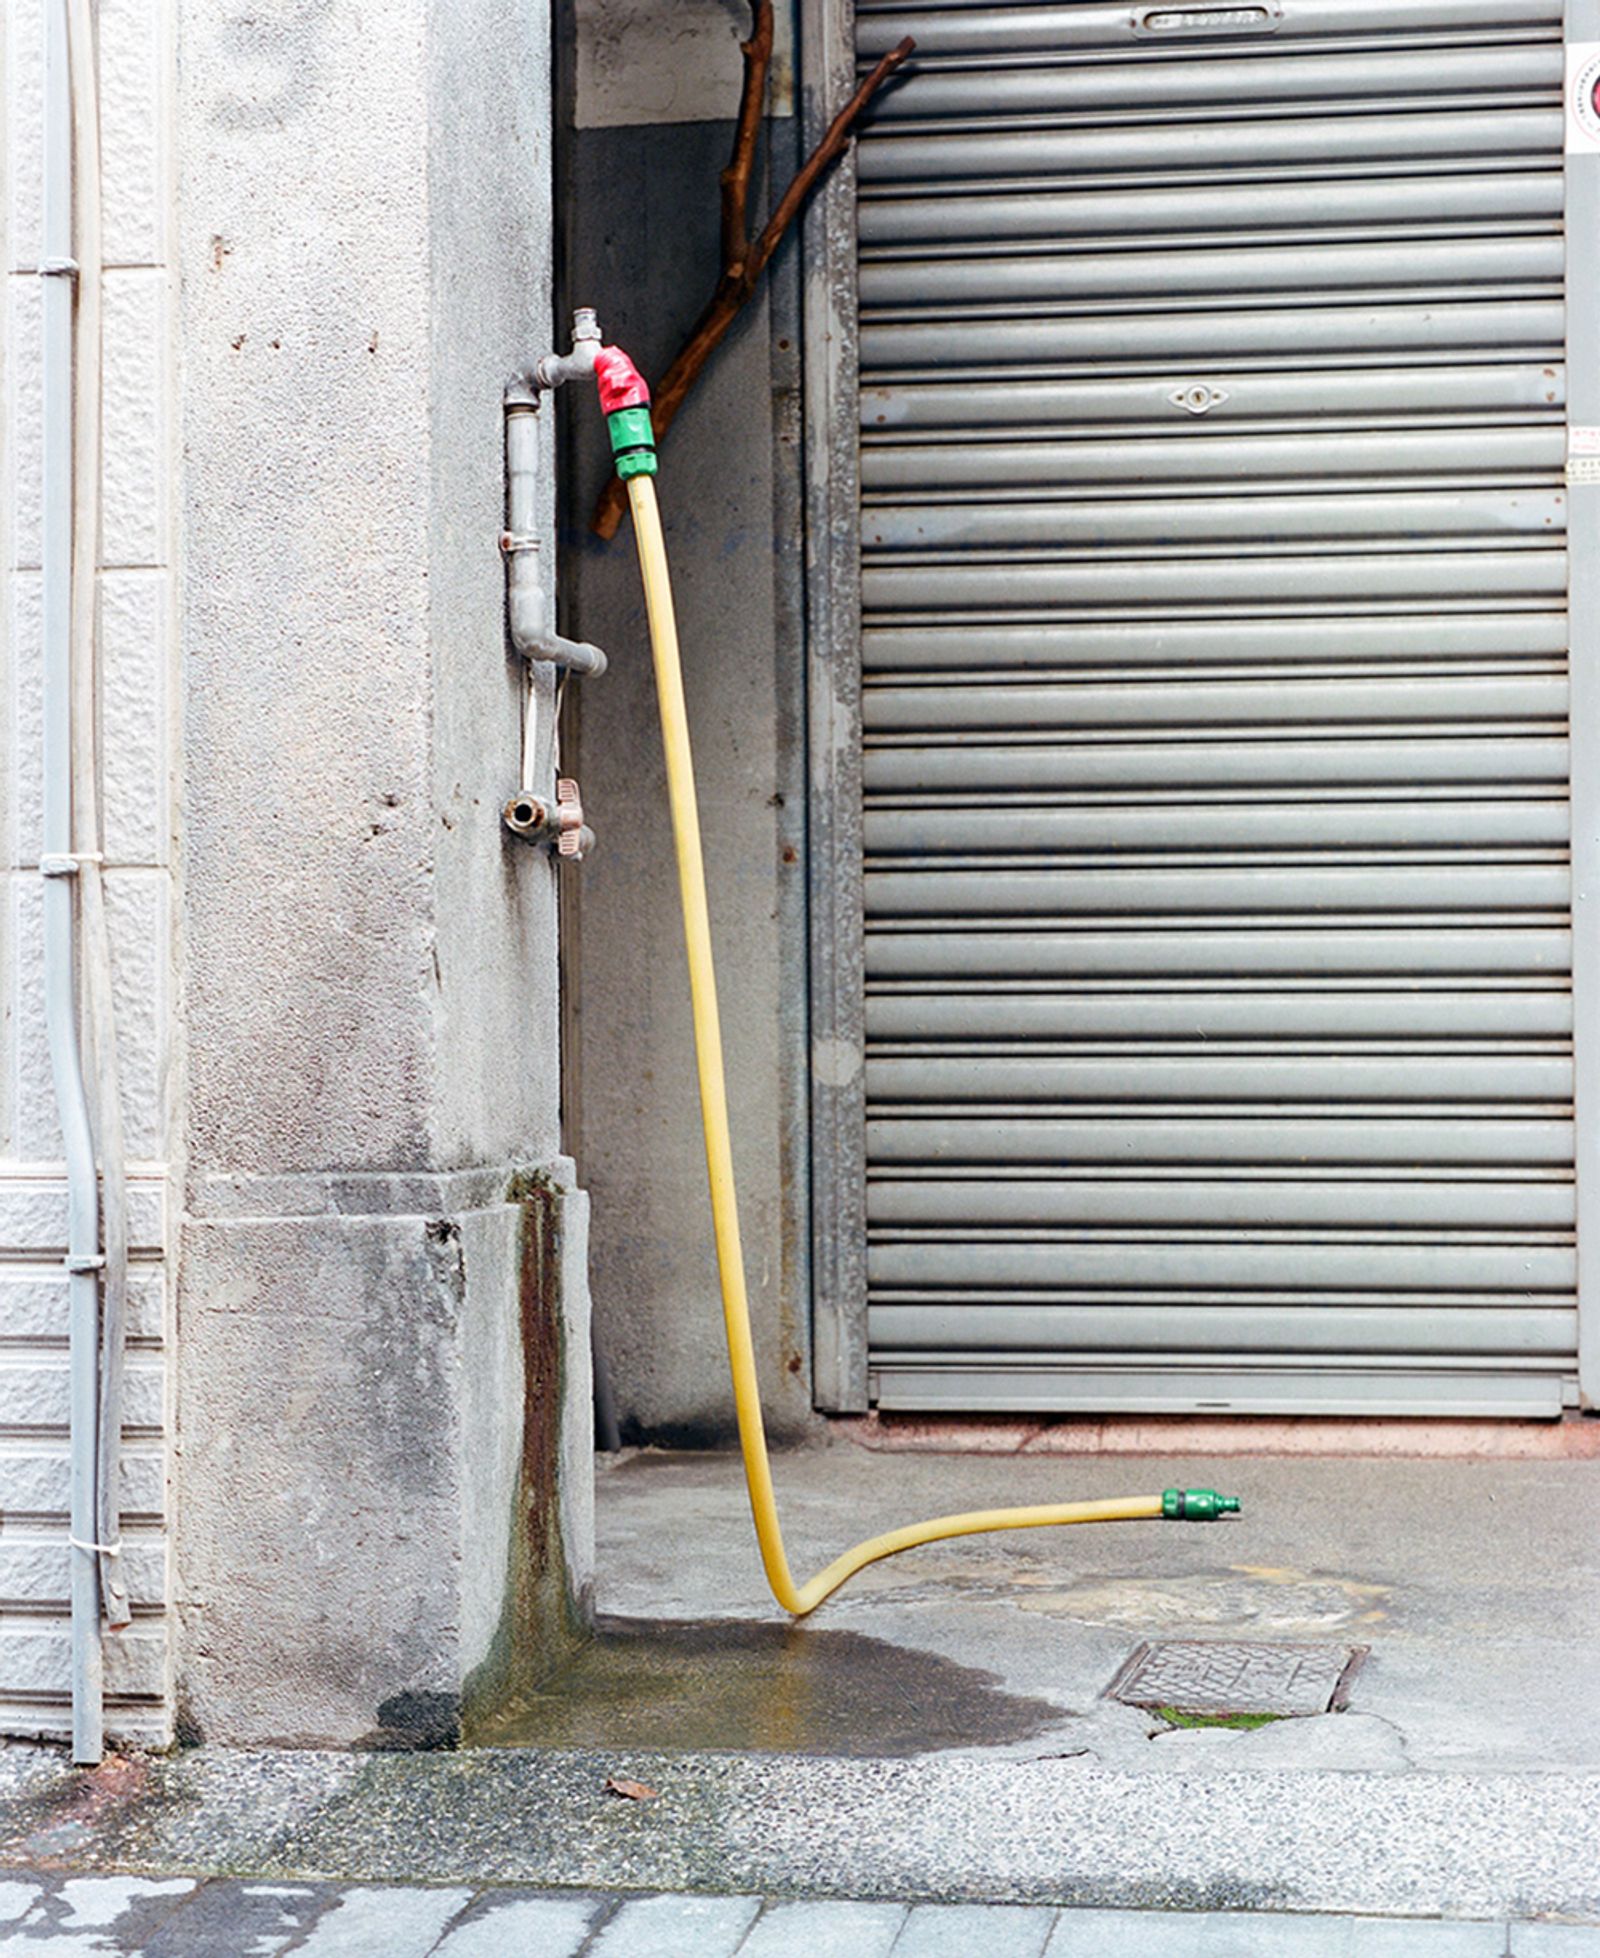 © Matija Brumen - Image from the Tainan fiction photography project